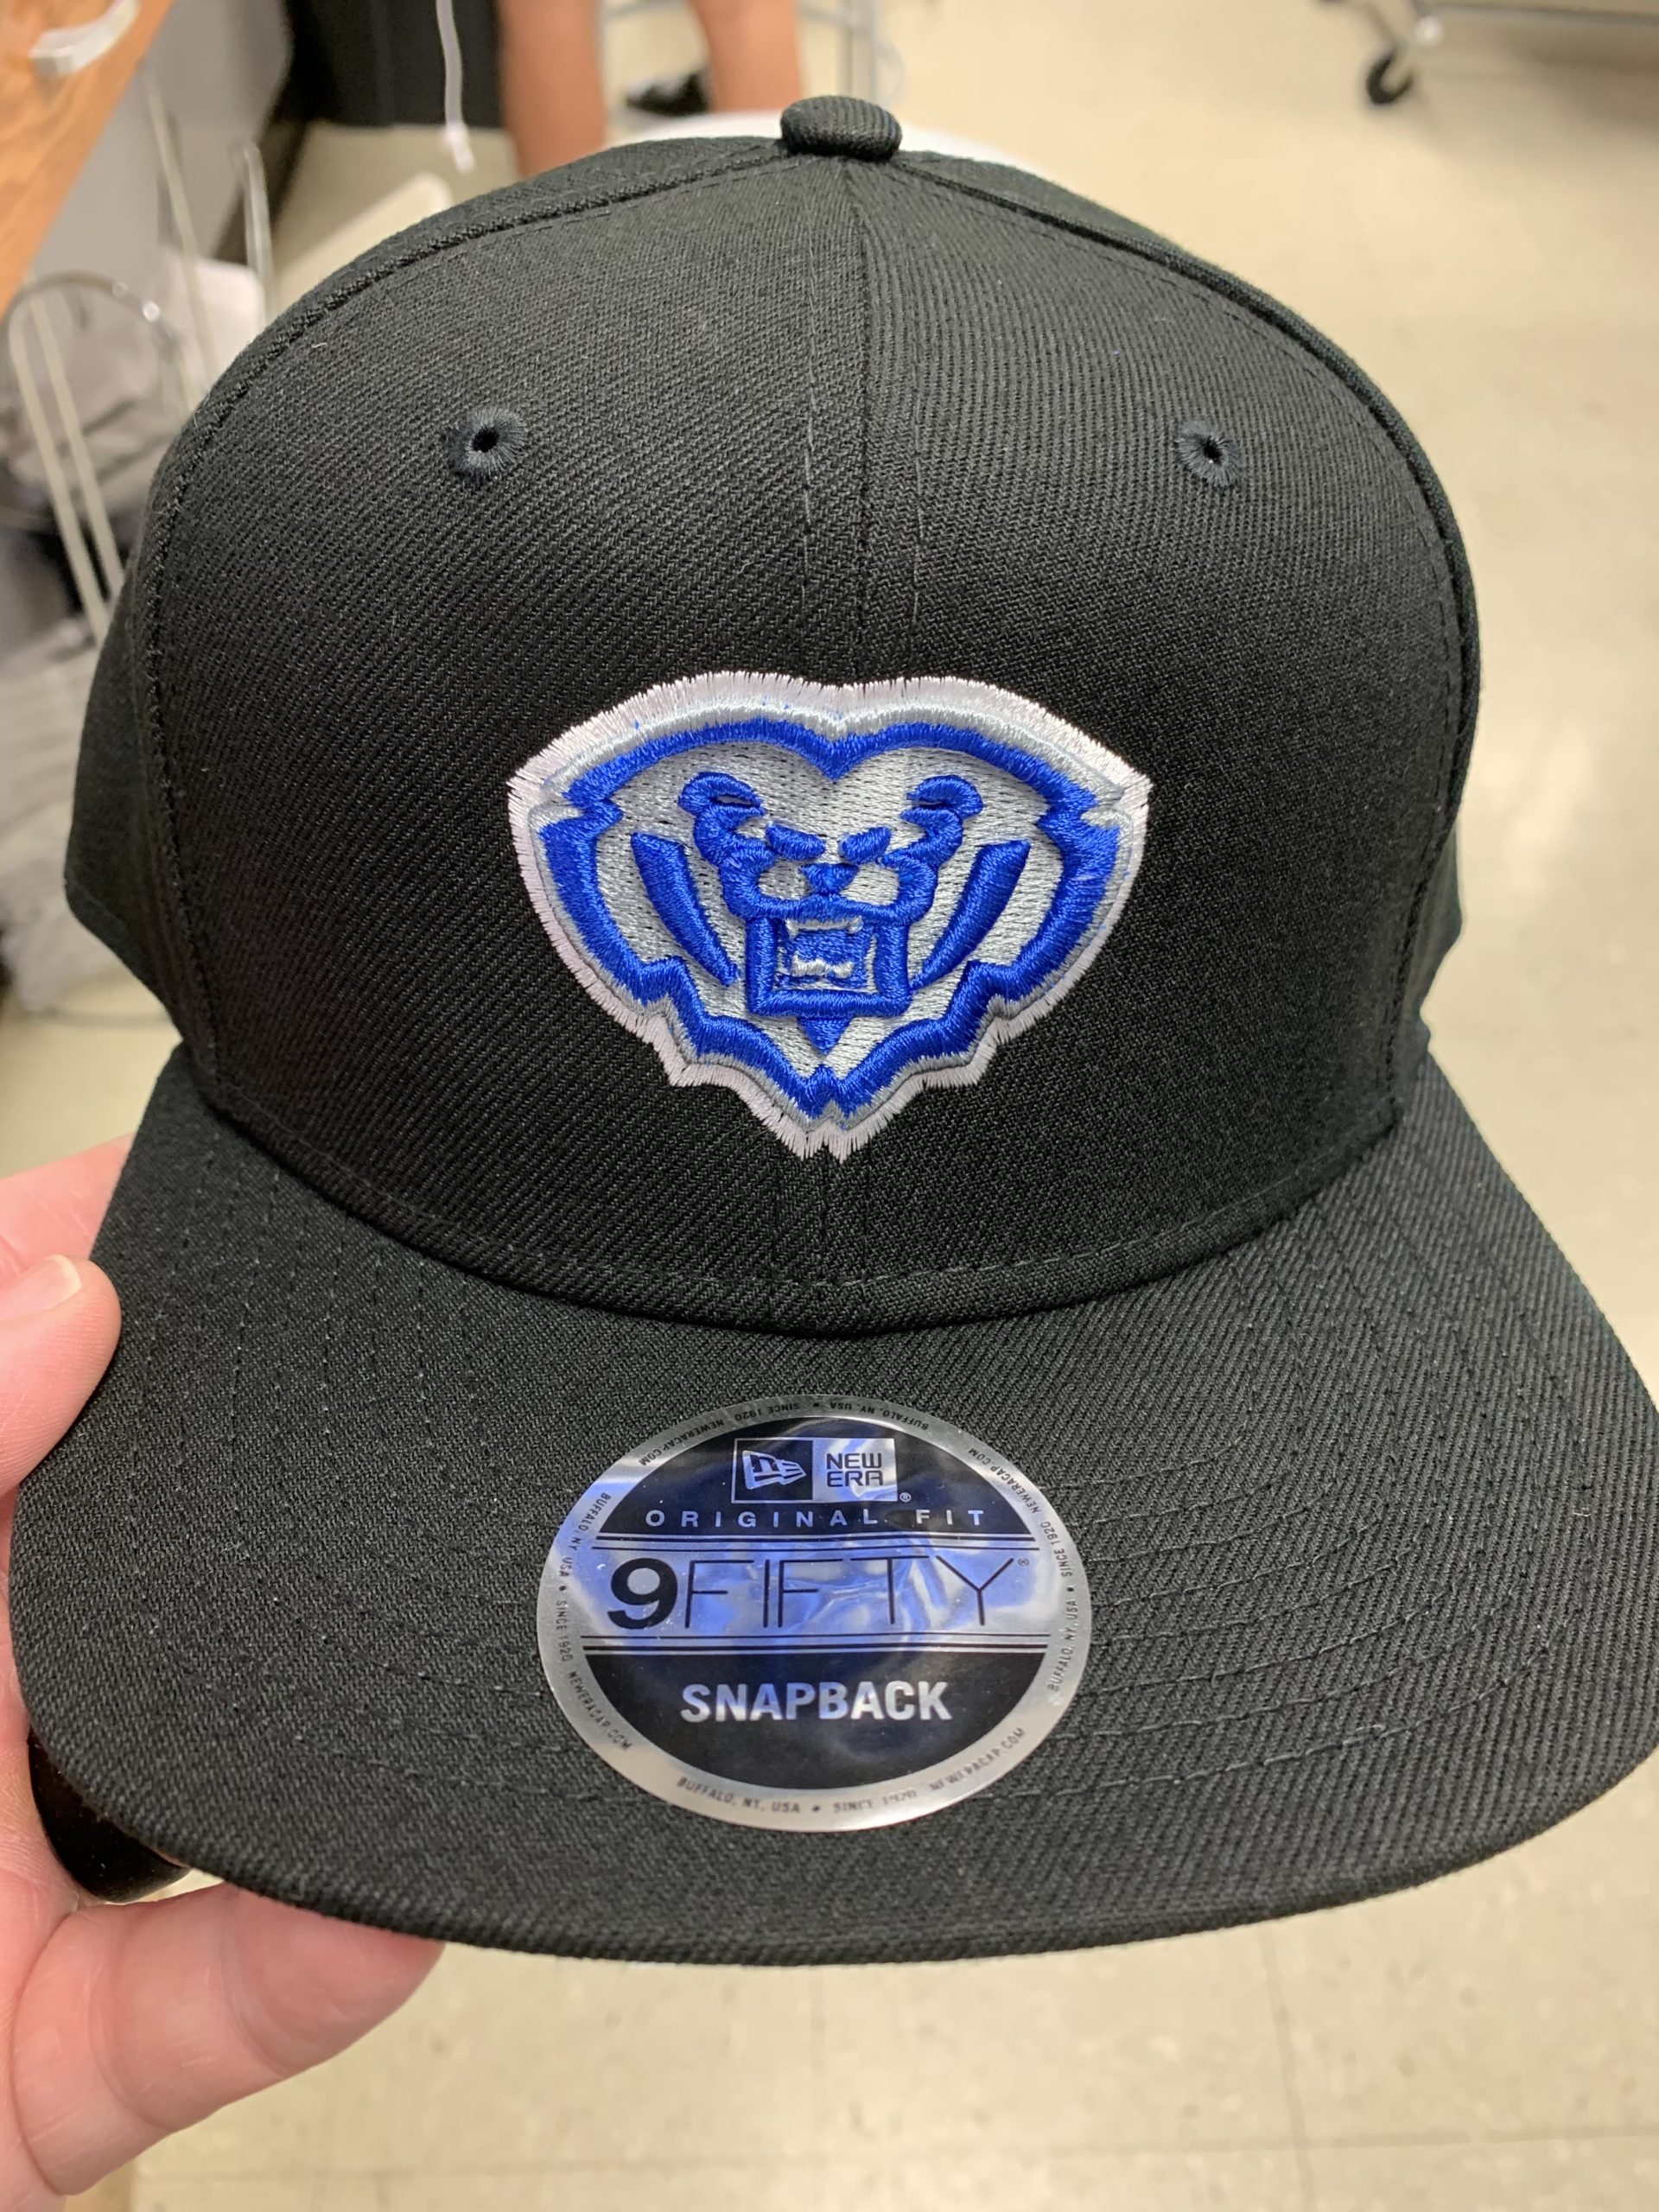 a hat with a tiger on it